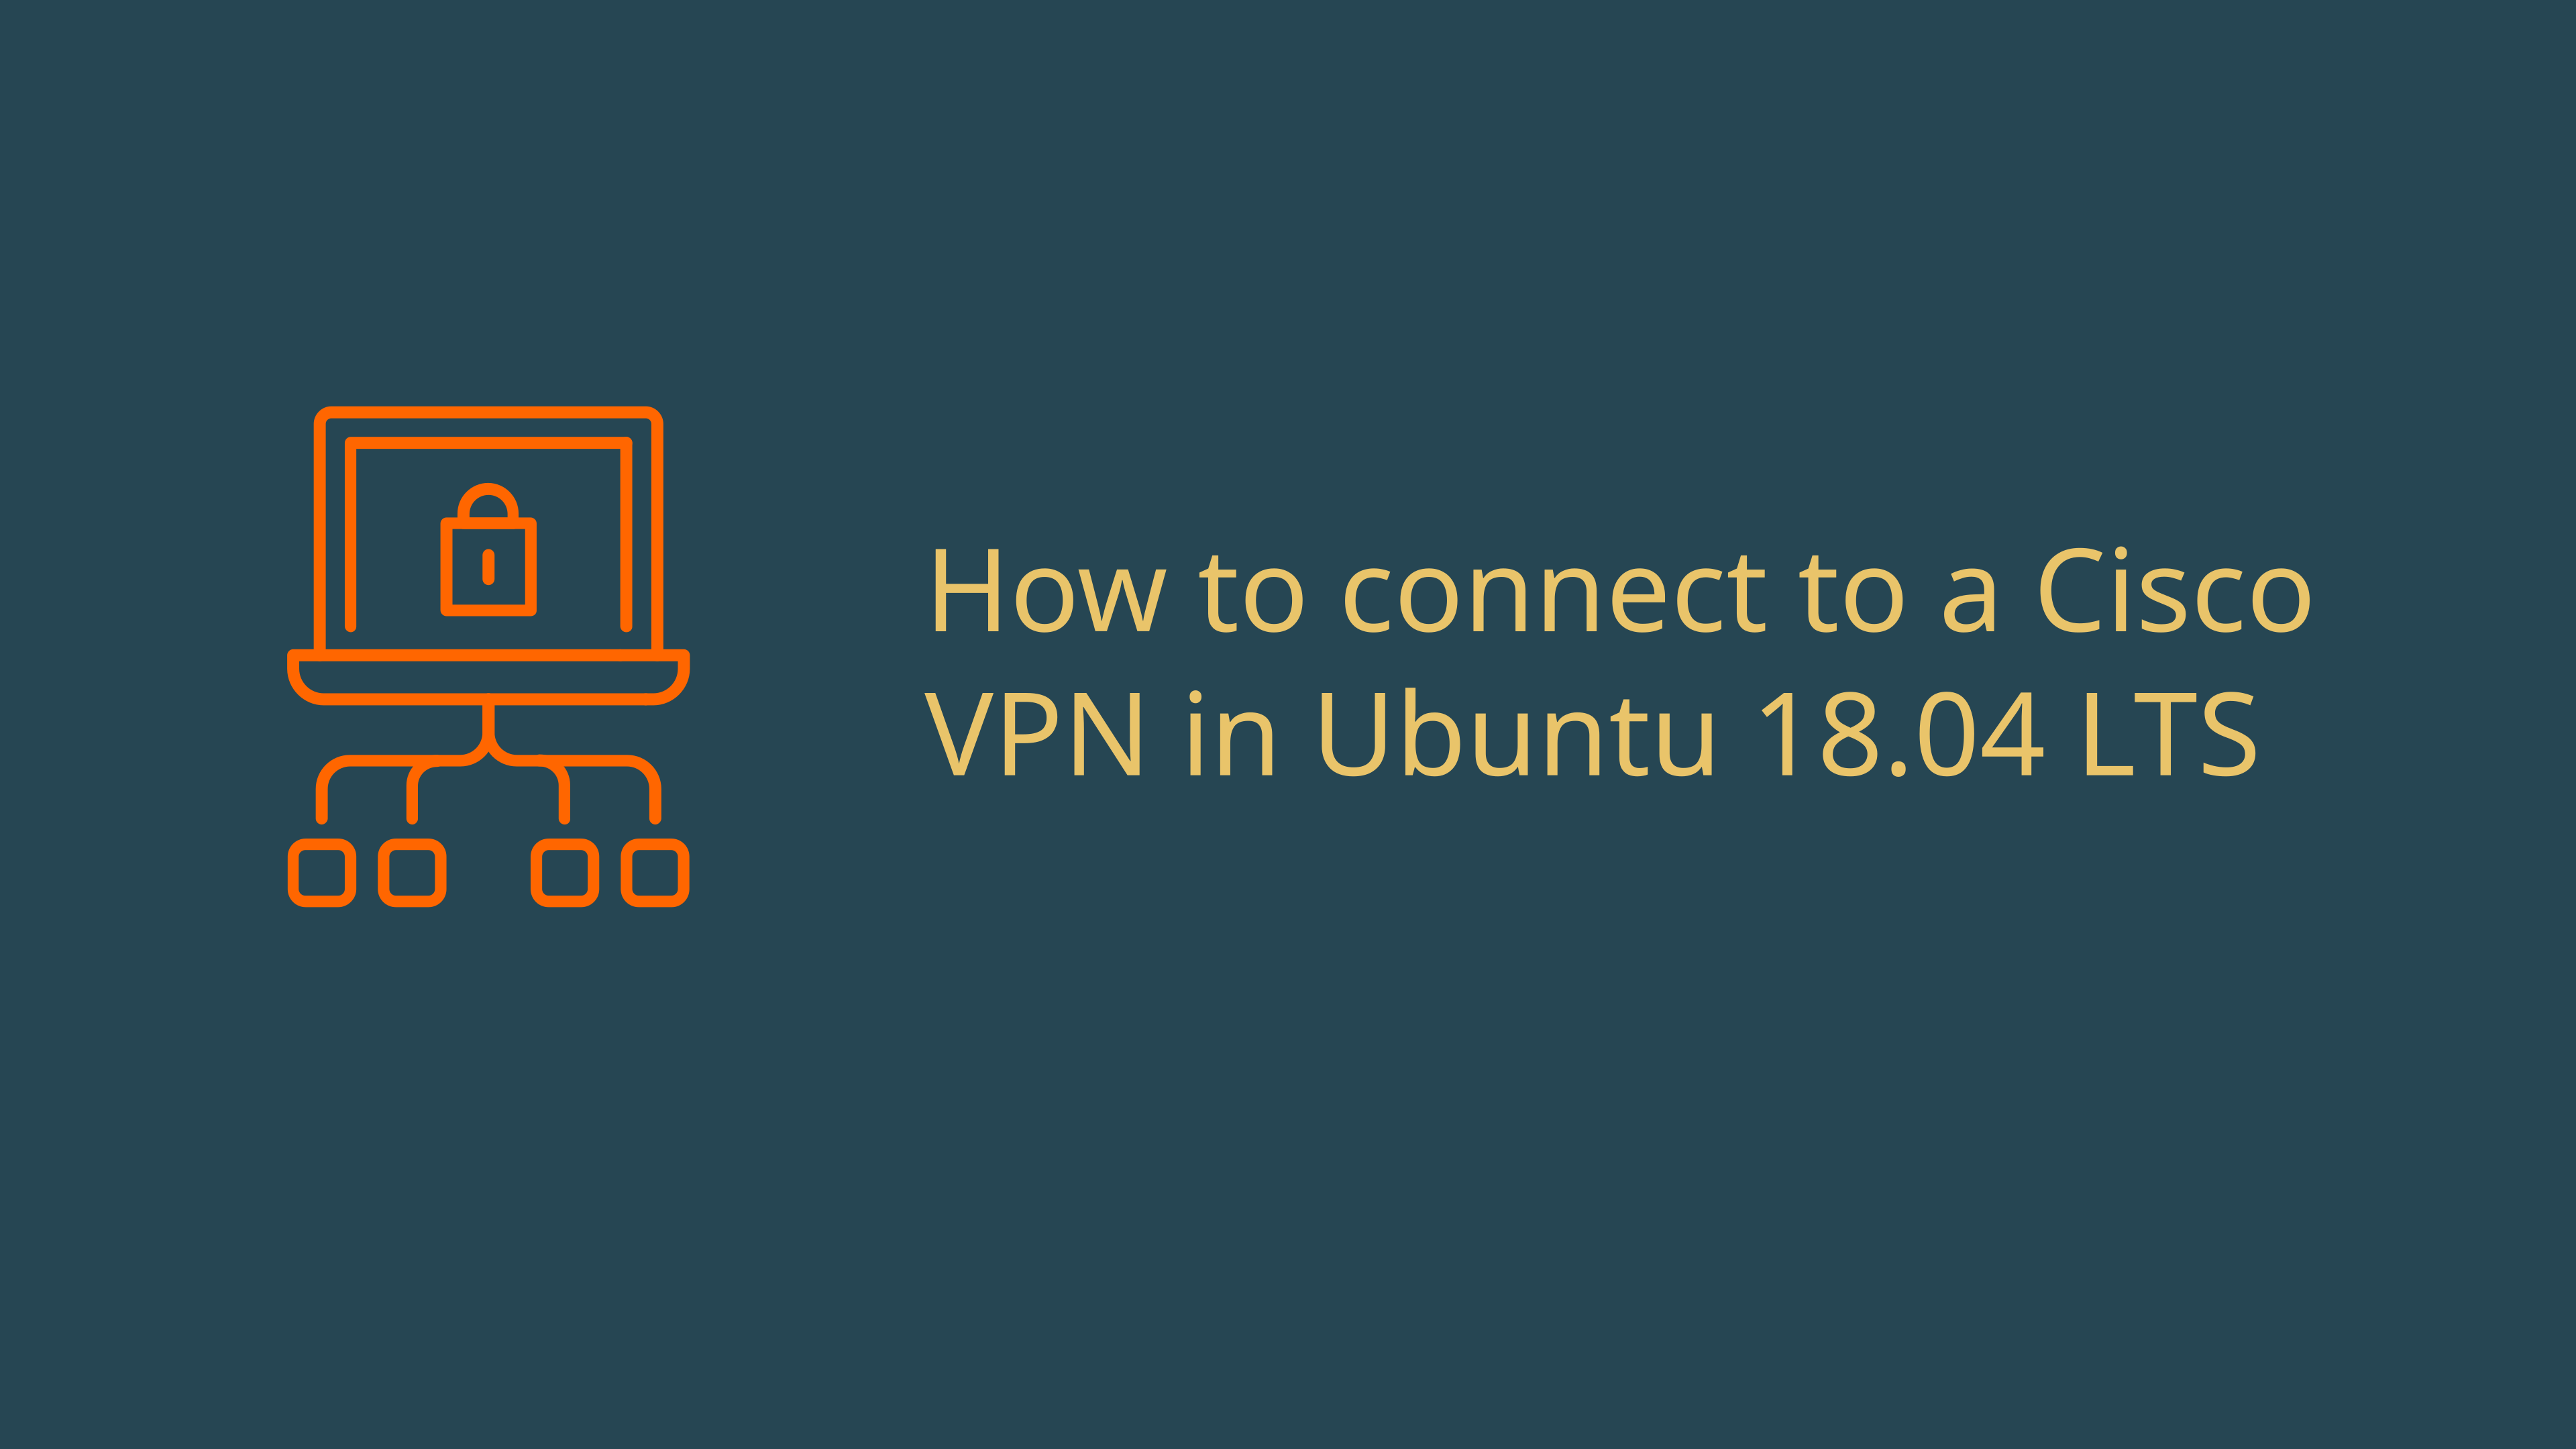 how-to-connect-to-a-cisco-vpn-in-ubuntu-18-04-lts.webp